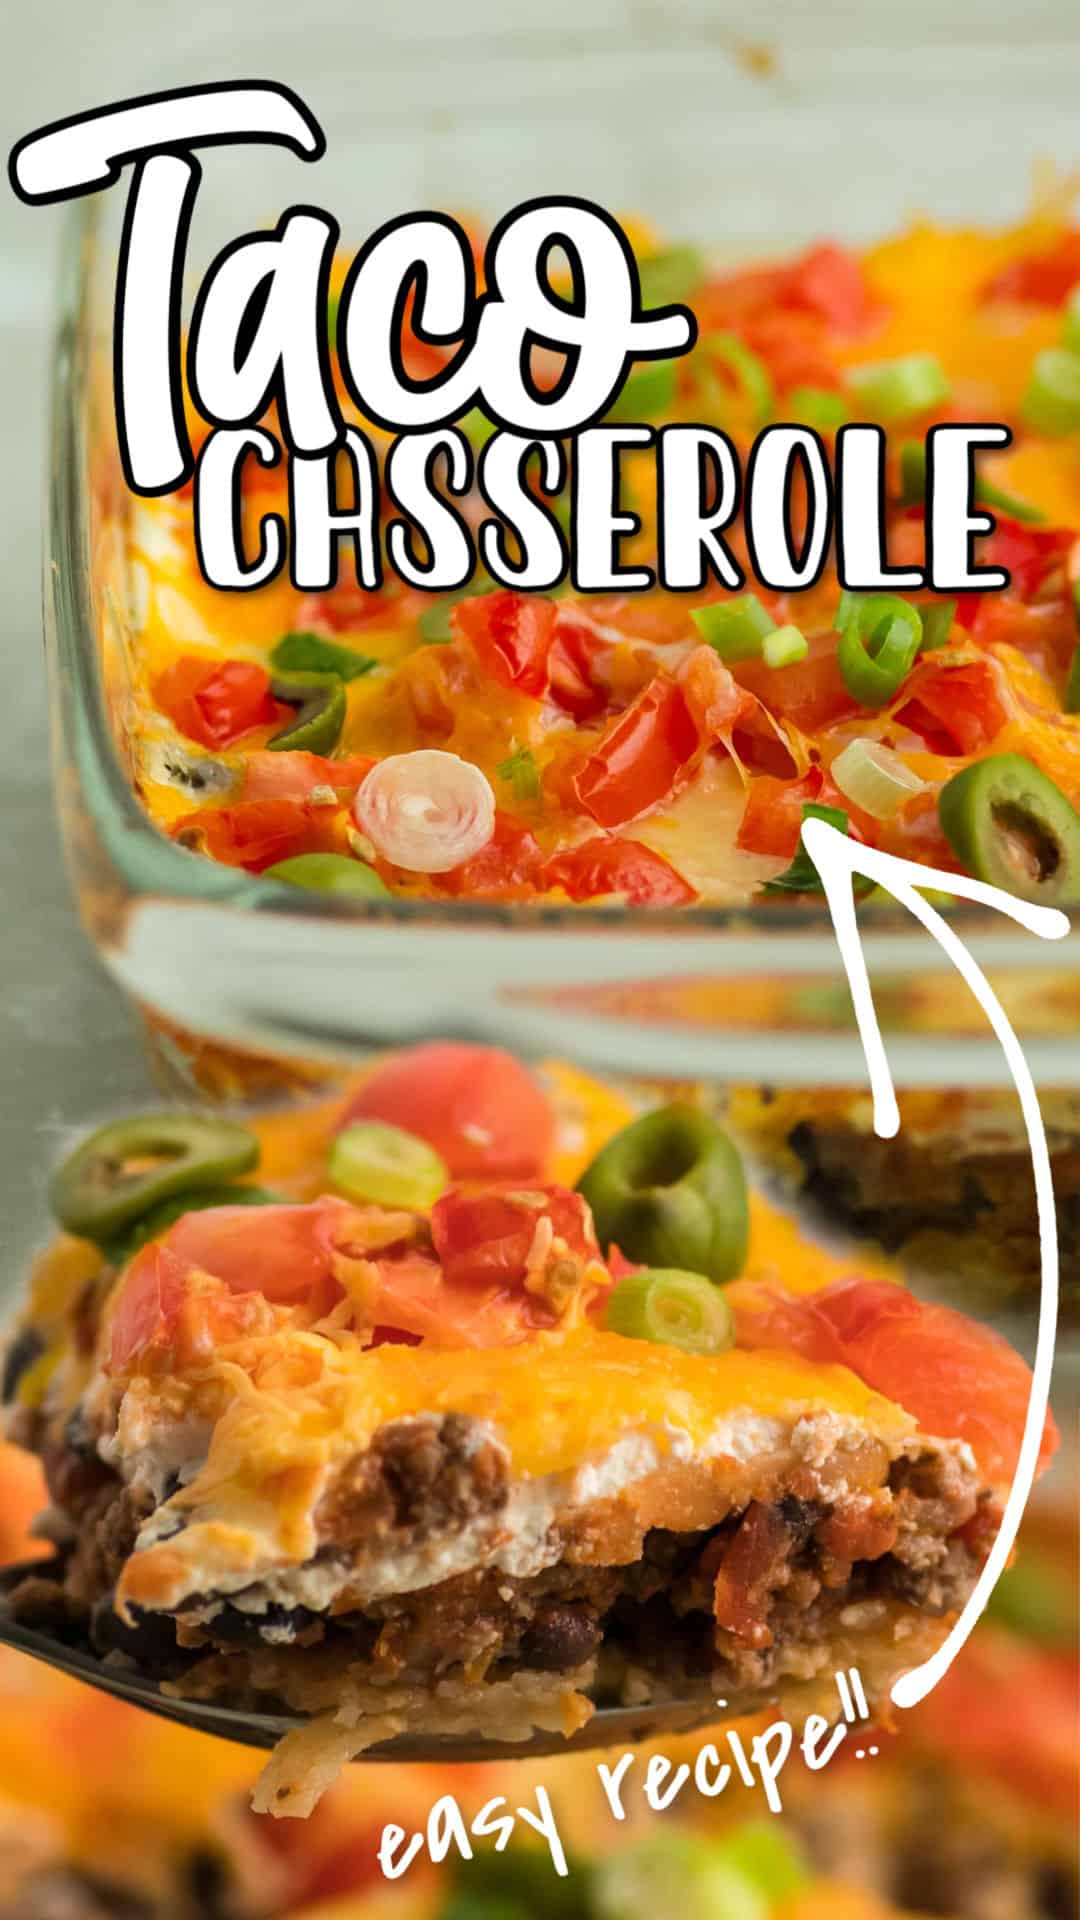 Spice up taco night with this easy Taco Casserole recipe! Even the kids at the table will be asking for seconds of this spin on a Mexican favorite. #cheerfulcook #casserole #taco #comfortfood ♡ cheerfulcook.com via @cheerfulcook